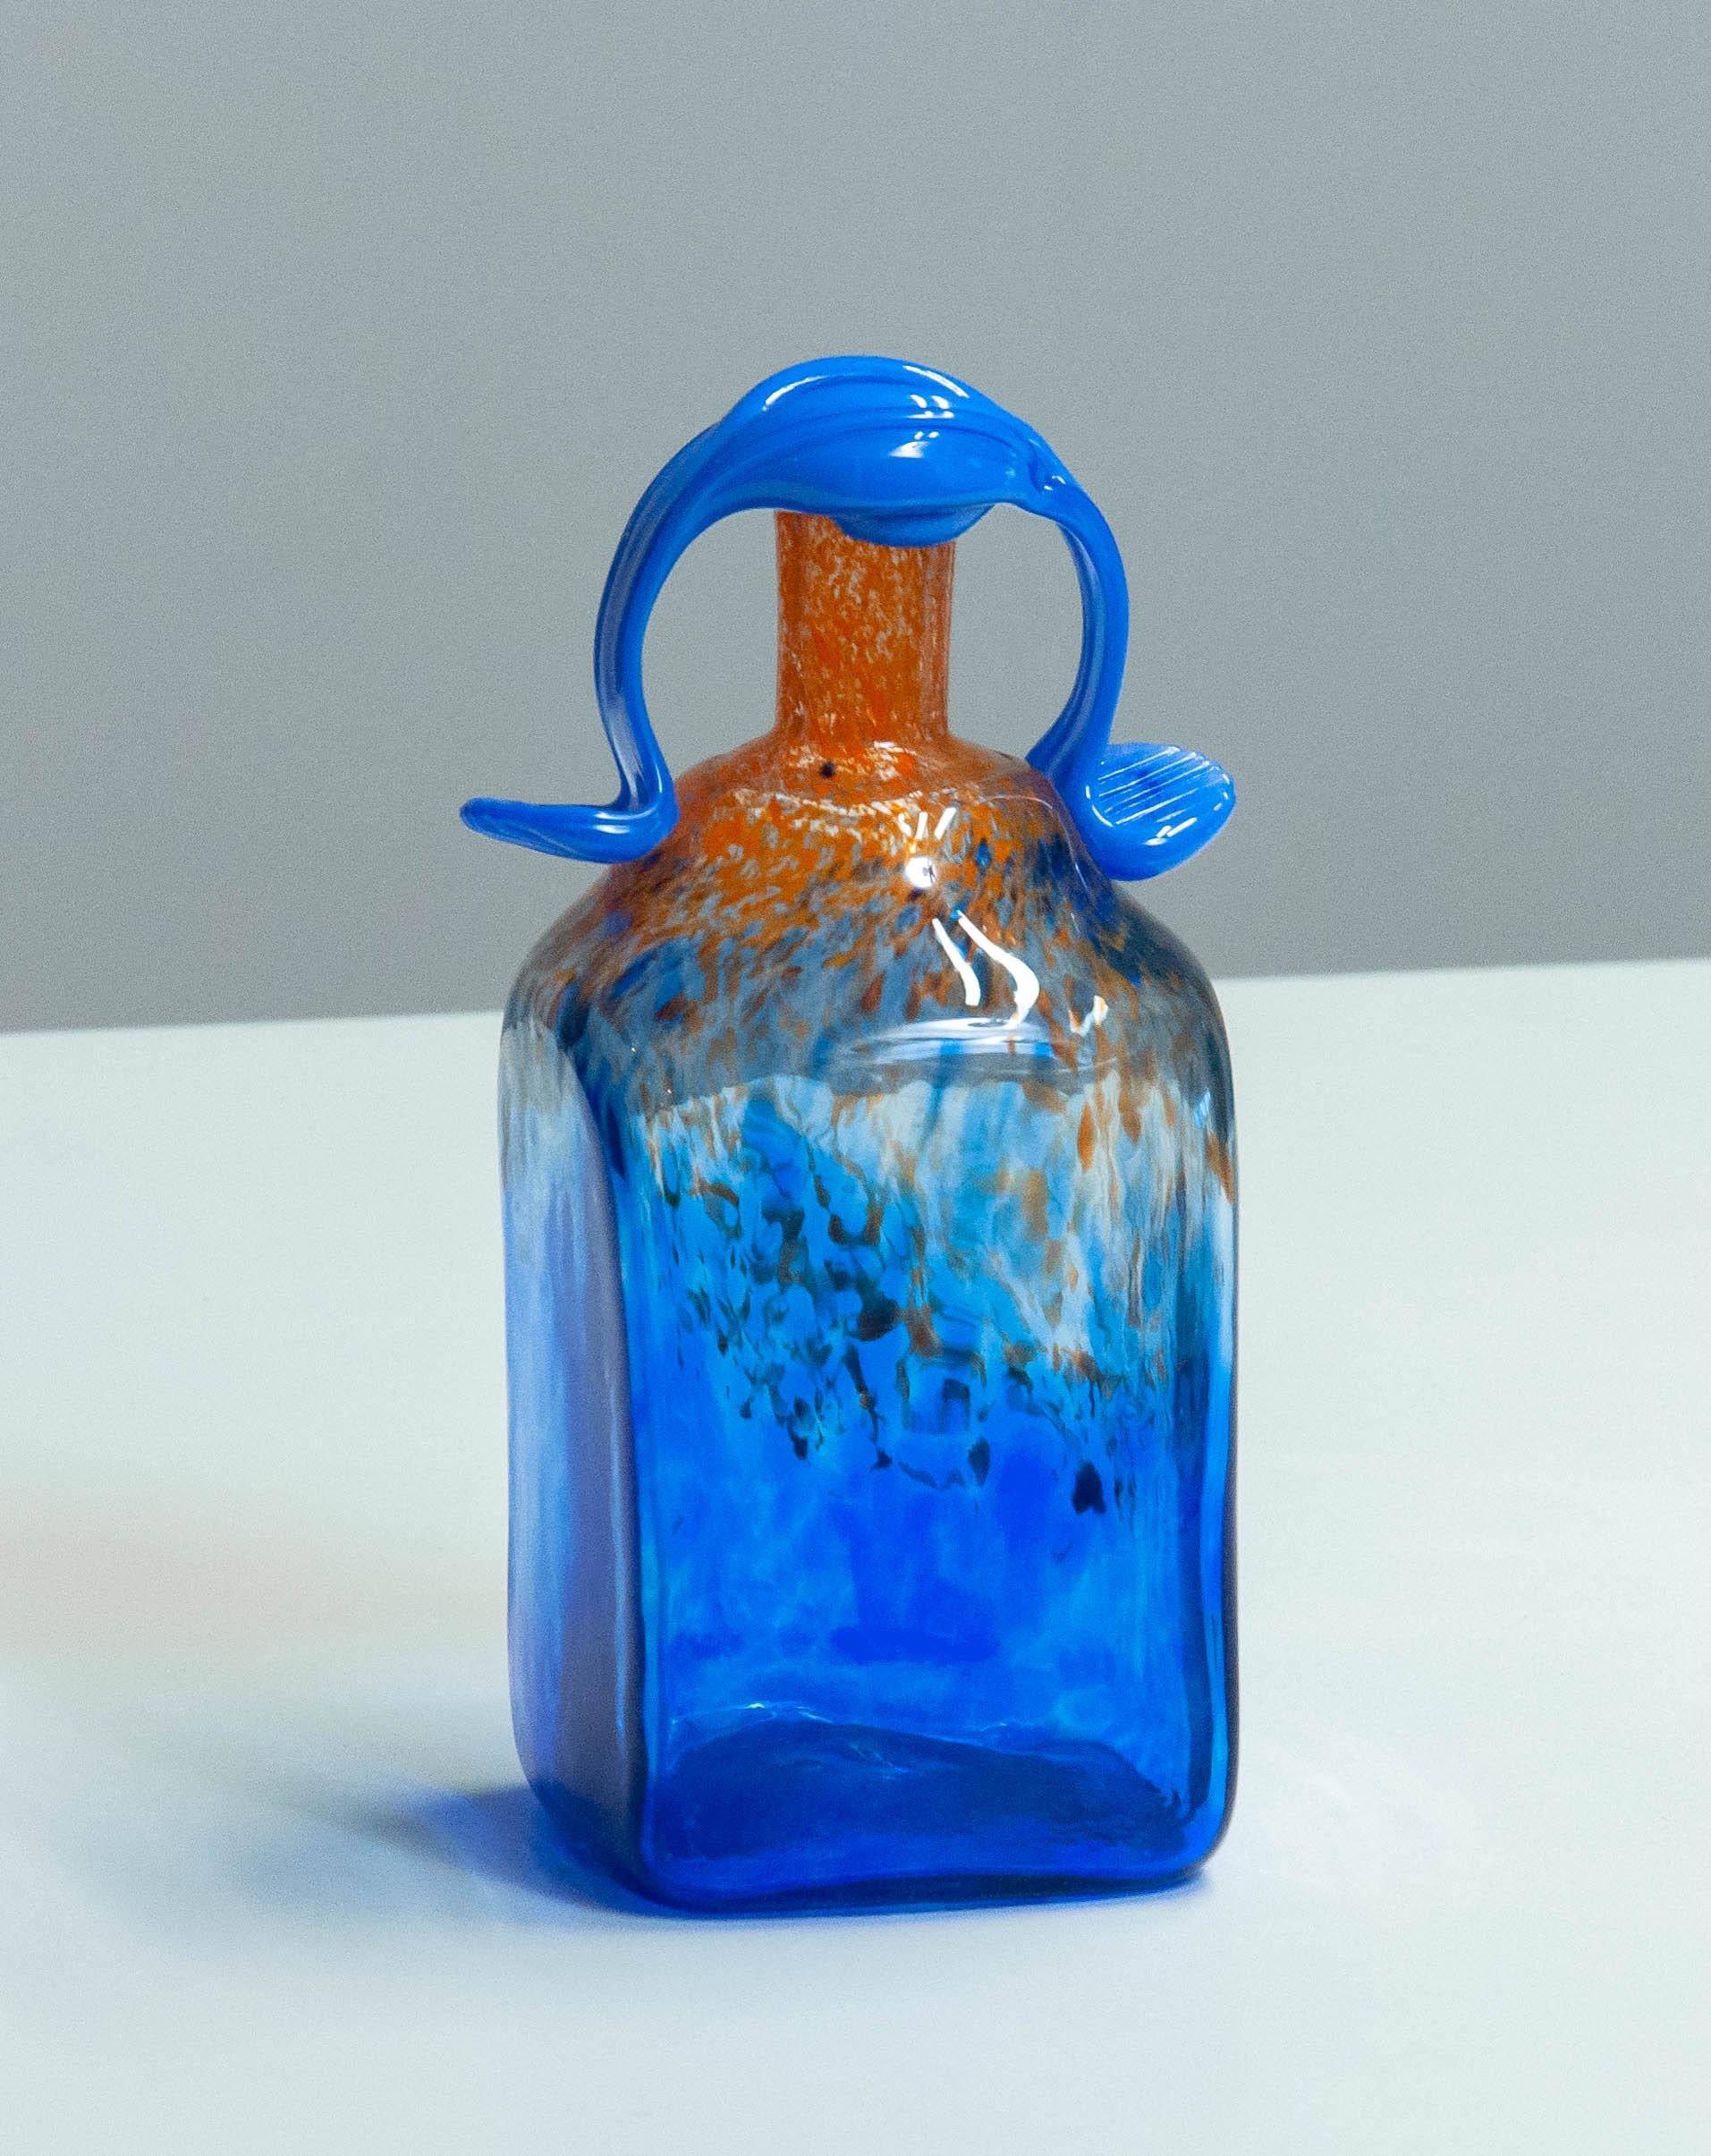 Absolutely beautiful and 'one of a kind' vase/bottle made by Staffan Gellerstedt in 1988 at Studio Glashyttan in Ahus Sweden. This masterpiece in dated and also signed by the artist himself.
An absolute must have for those who collect rare art